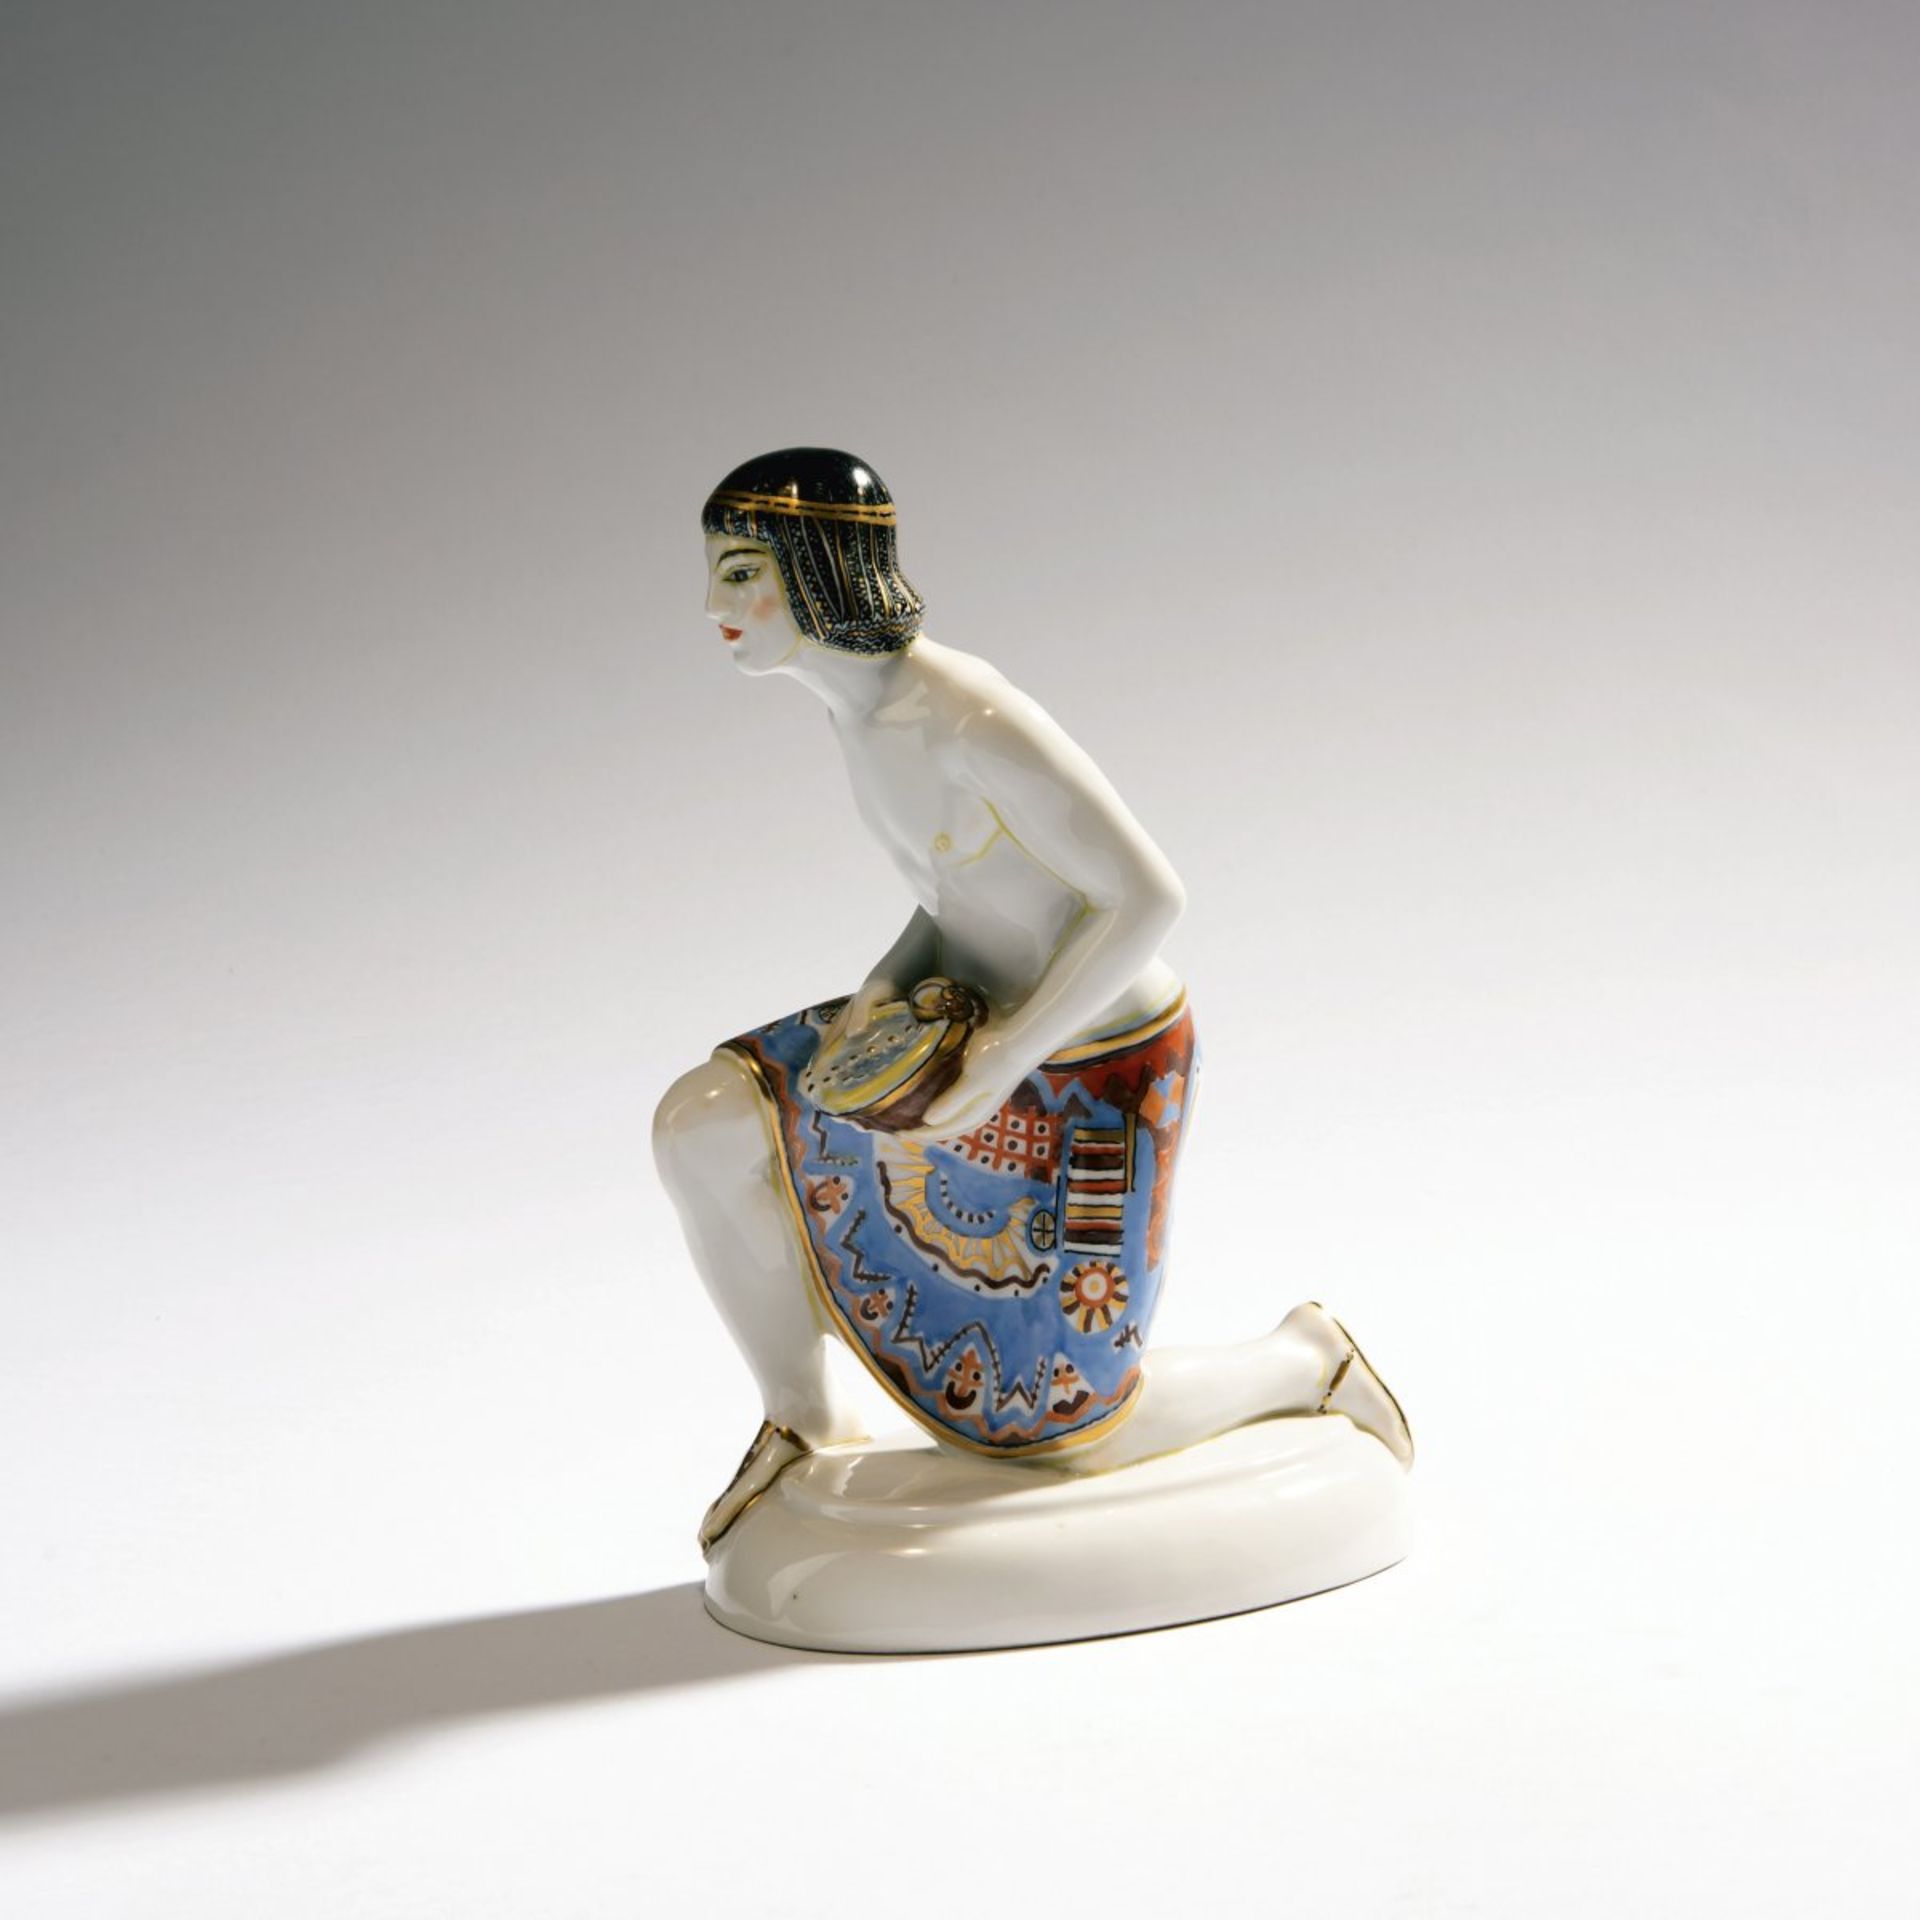 Adolph Amberg, 'Egyptian', 1910'Egyptian', 1910H. 21 cm. Made by KPM Berlin, in 1914. Porcelain,